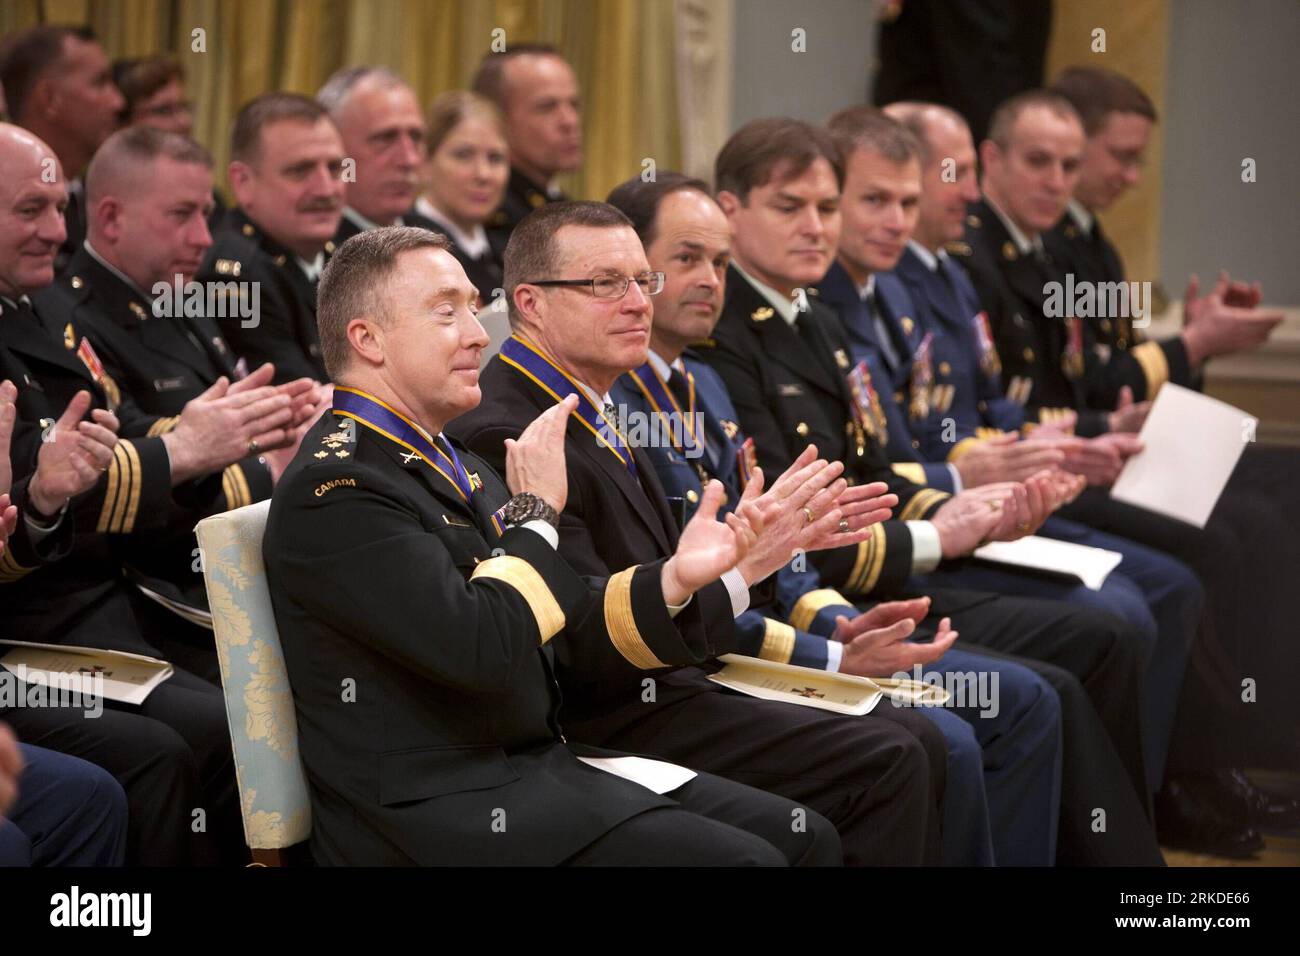 Bildnummer: 54926647  Datum: 18.02.2011  Copyright: imago/Xinhua (110219) -- OTTAWA, Feb. 19, 2011 (Xinhua) -- Attendees clap during an Order of Military Merit Investiture ceremony at Rideau Hall in Ottawa, Ontario, Canada, on Feb. 18, 2011. On behalf of the Queen of Canada, Canada s Governor invests 56 individuals into the Order of Military Merit on Friday. The order of merit was created to recognize meritorious service and devotion to duty by members of the Canadian Forces, either regular or reserve personnel. (Xinhua/Christopher Pike) (msq) CANADA-ORDER OF MILITARY MERIT PUBLICATIONxNOTxINx Stock Photo